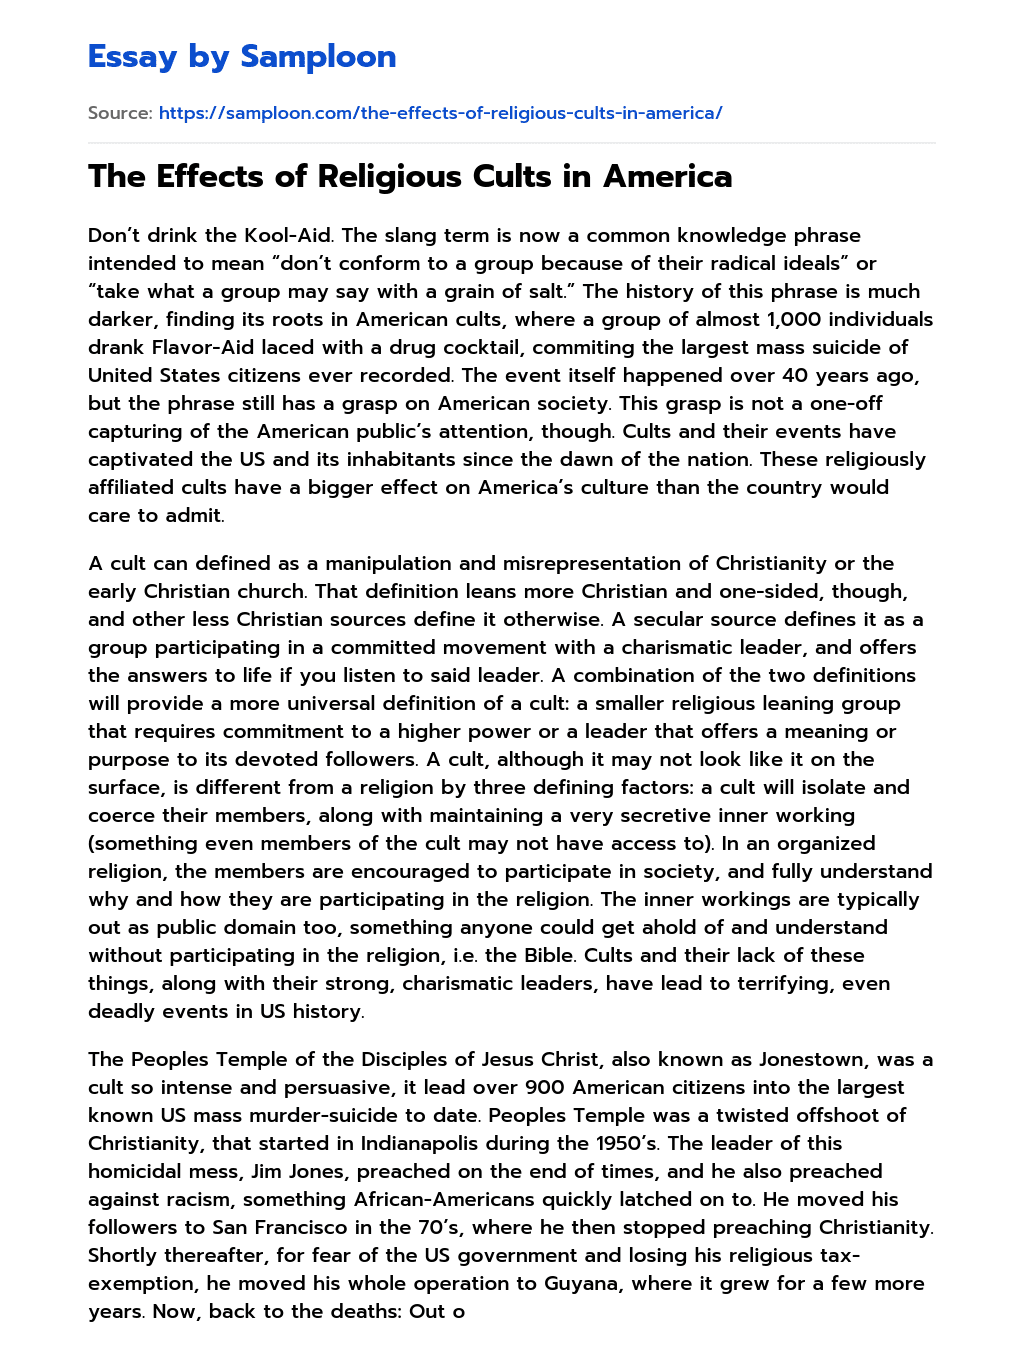 The Effects of Religious Cults in America essay